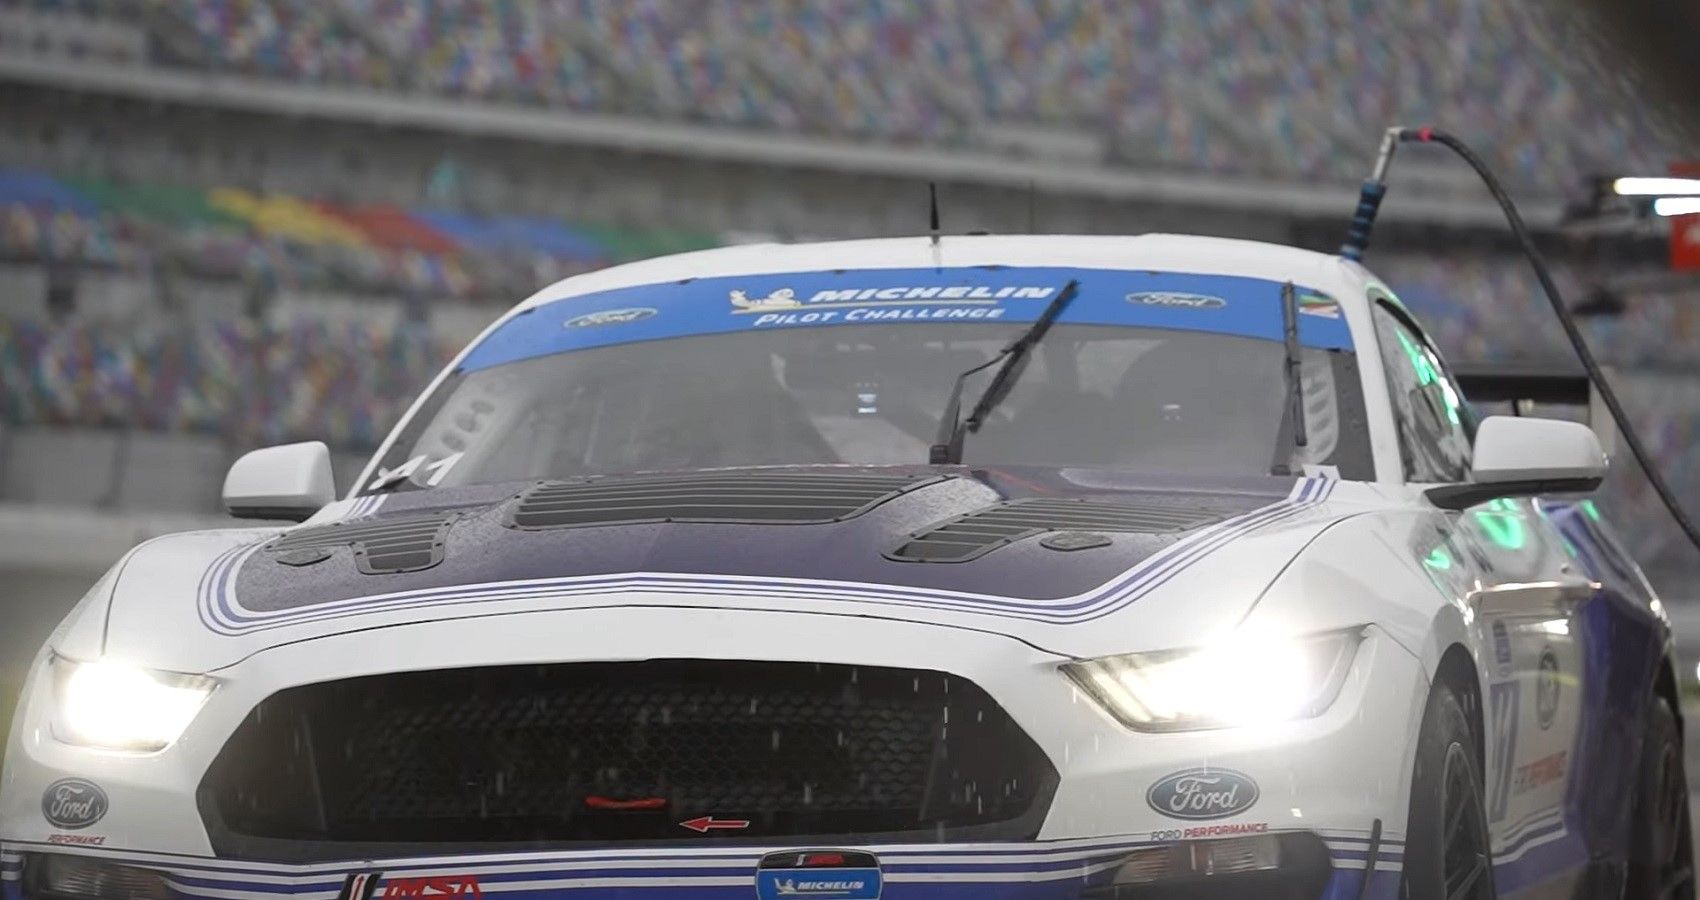 Watch Hailie Deegan Drive The Ford Mustang GT4 In The Rain At 170 MPH